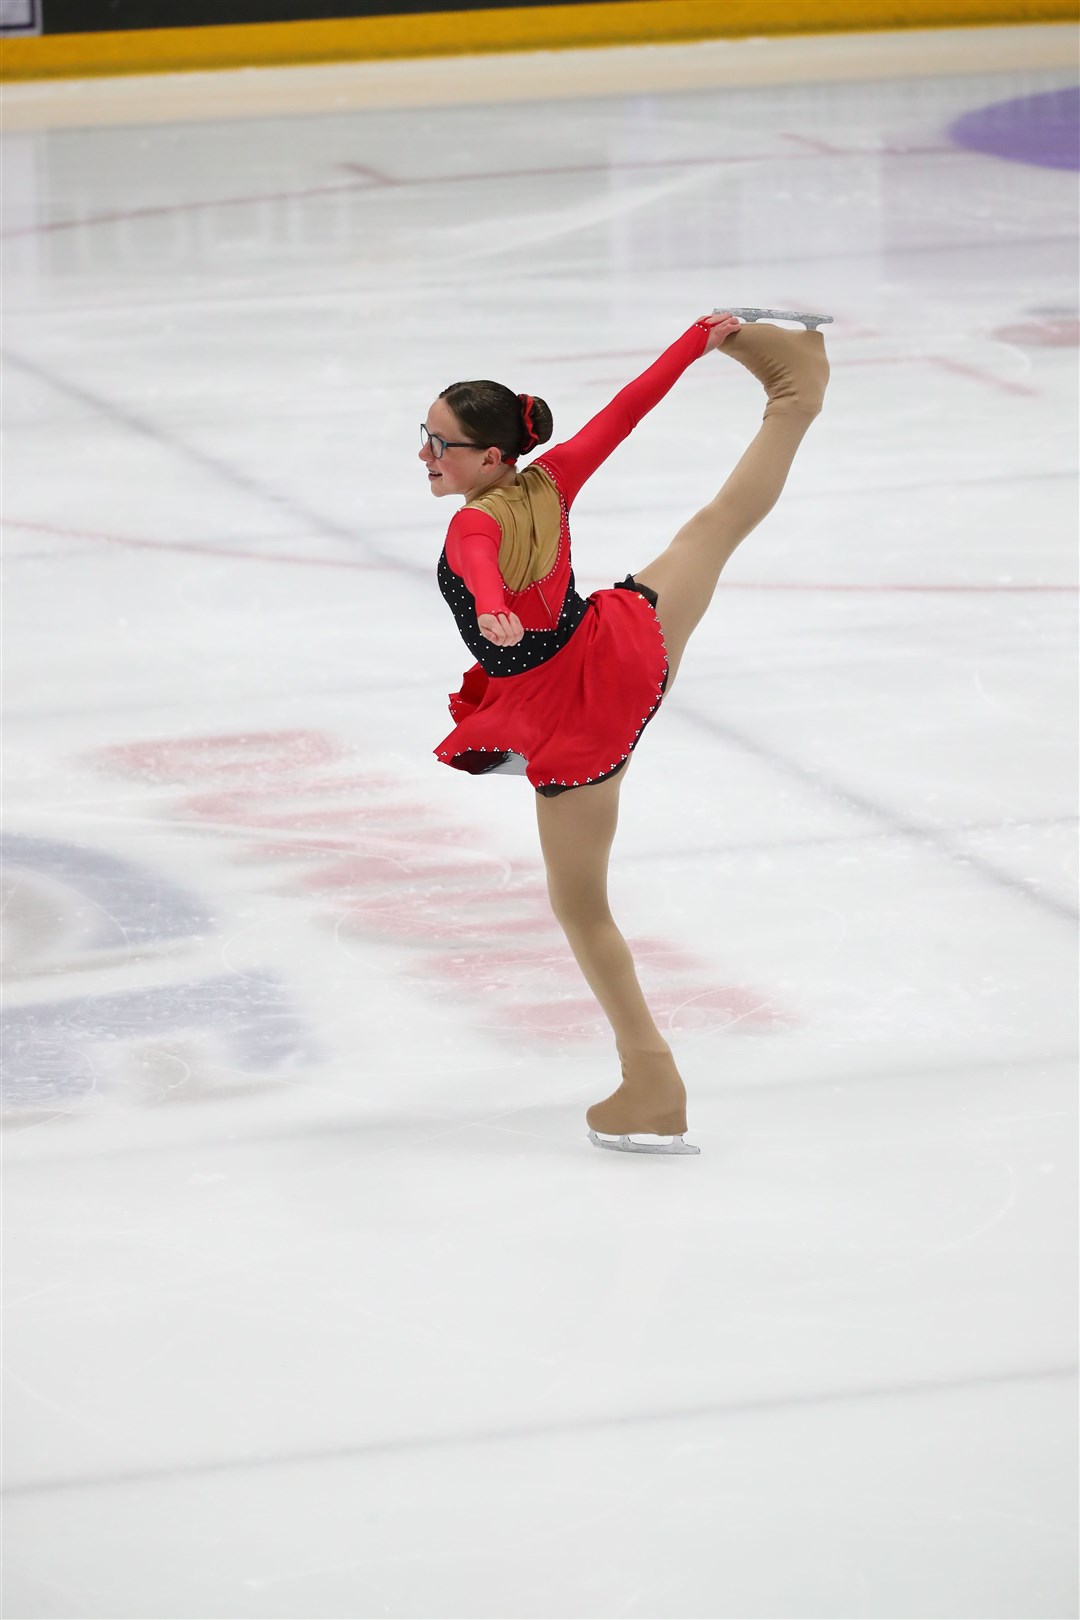 Emilie Lawson's routine earned the bronze medal.